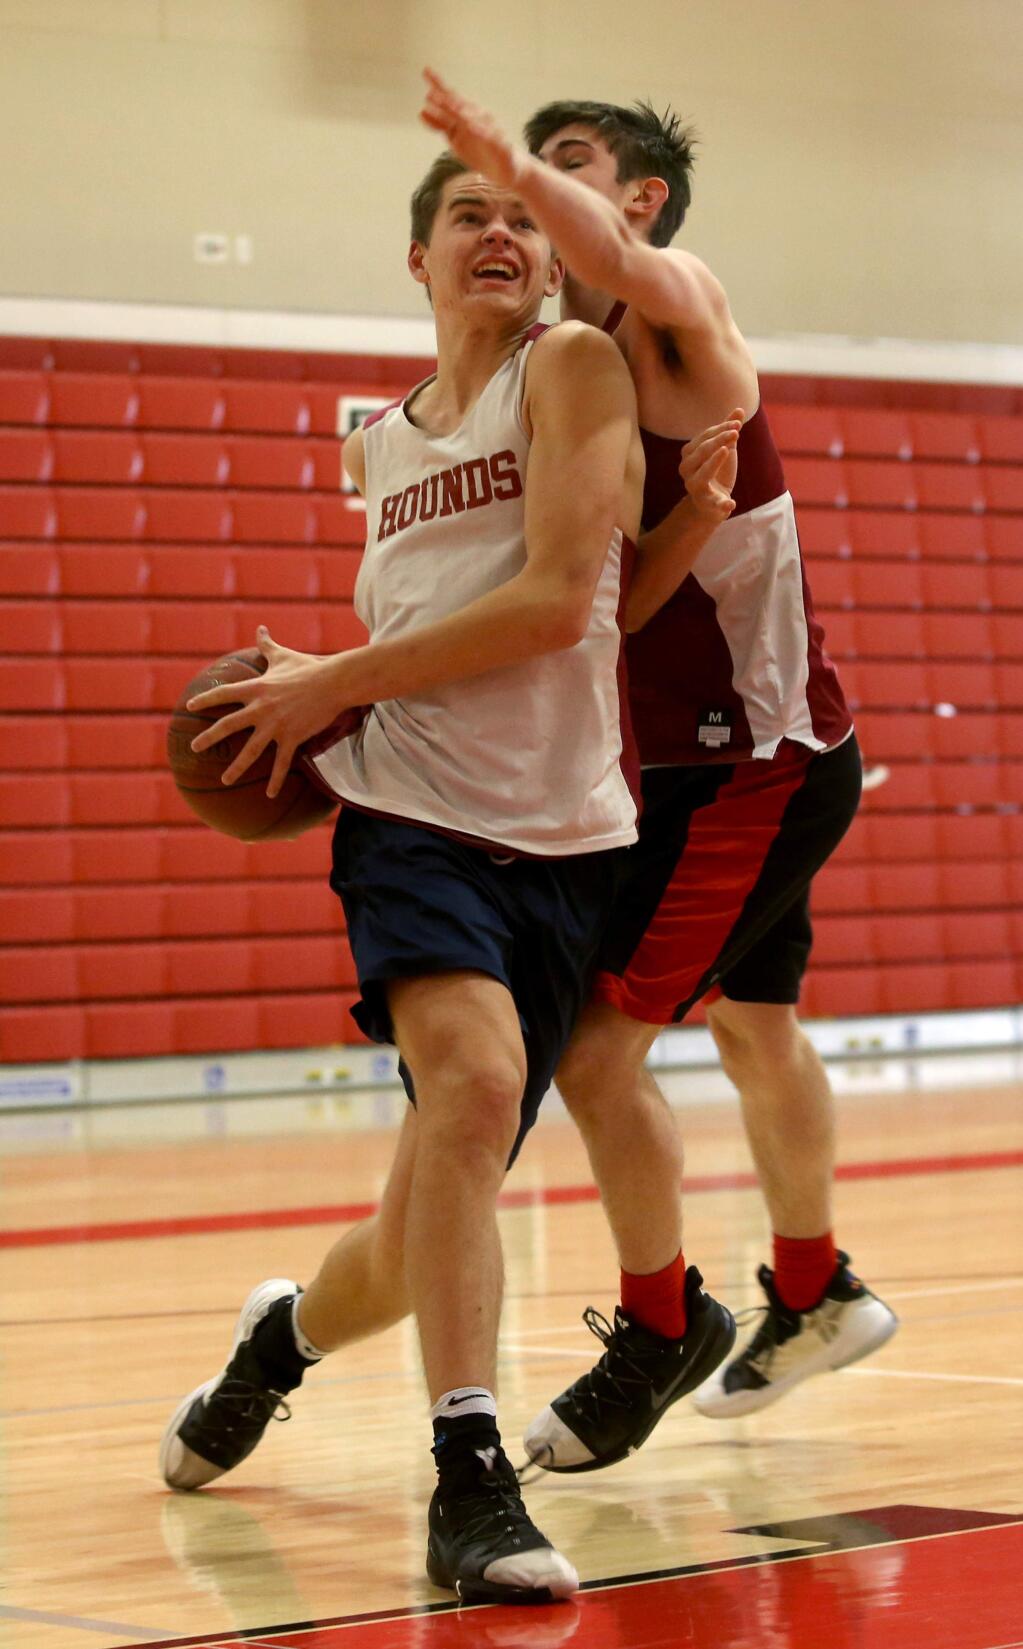 Sophomore Dylan Hayman is guarded by junior Avery Billman as he tries to drive toward the basket during practice at Healdsburg High School on Wednesday, January 2, 2019 in Healdsburg, California. (BETH SCHLANKER/The Press Democrat)